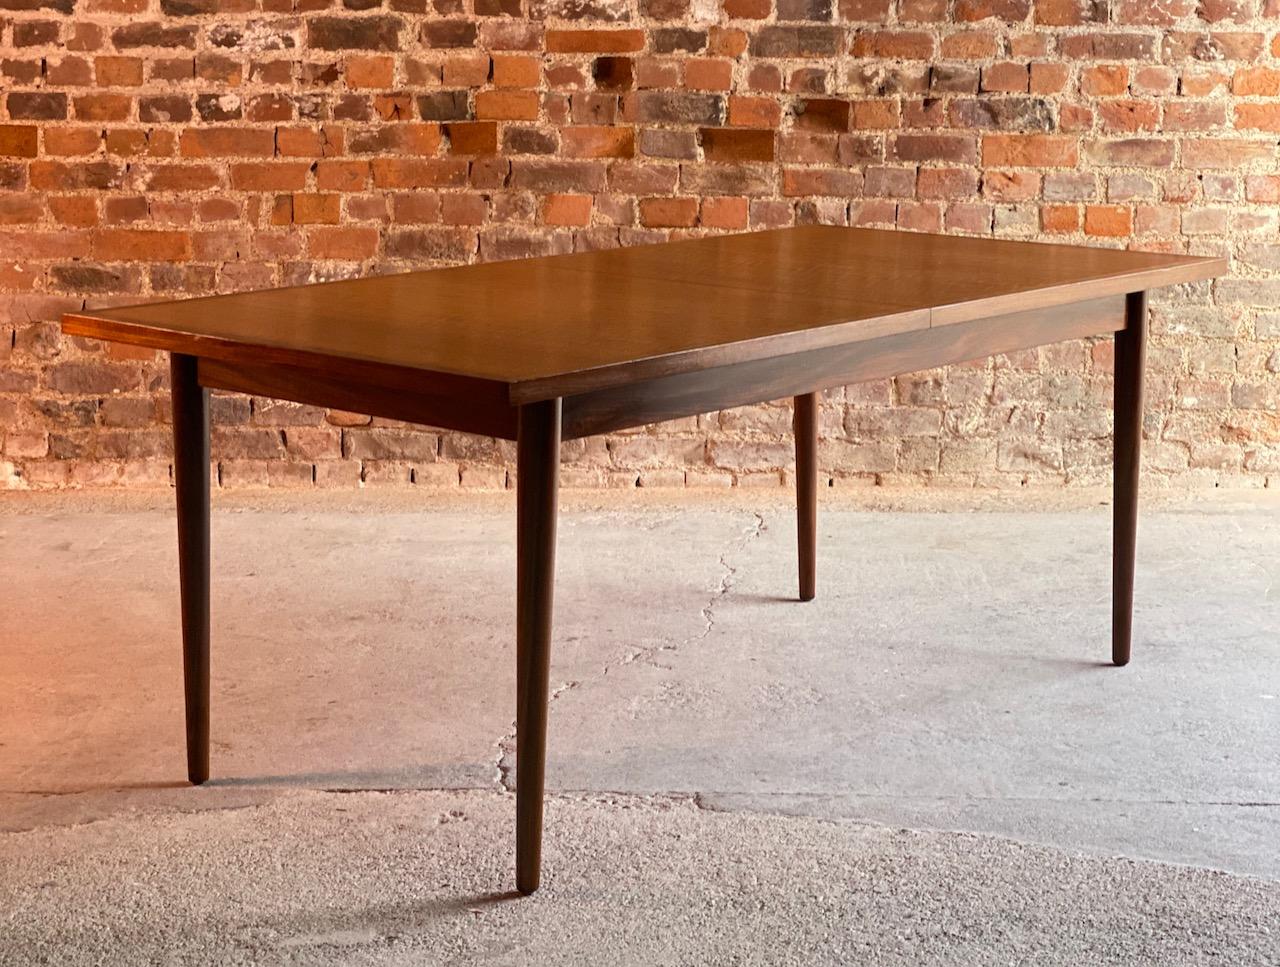 Robert Heritage walnut and teak dining table for Archie Shine, circa 1960

A stunning Midcentury Robert Heritage walnut & Afromosia (African Teak) Dining Table manufactured by Archie Shine and retailed through Harrods, London Circa 1960, the